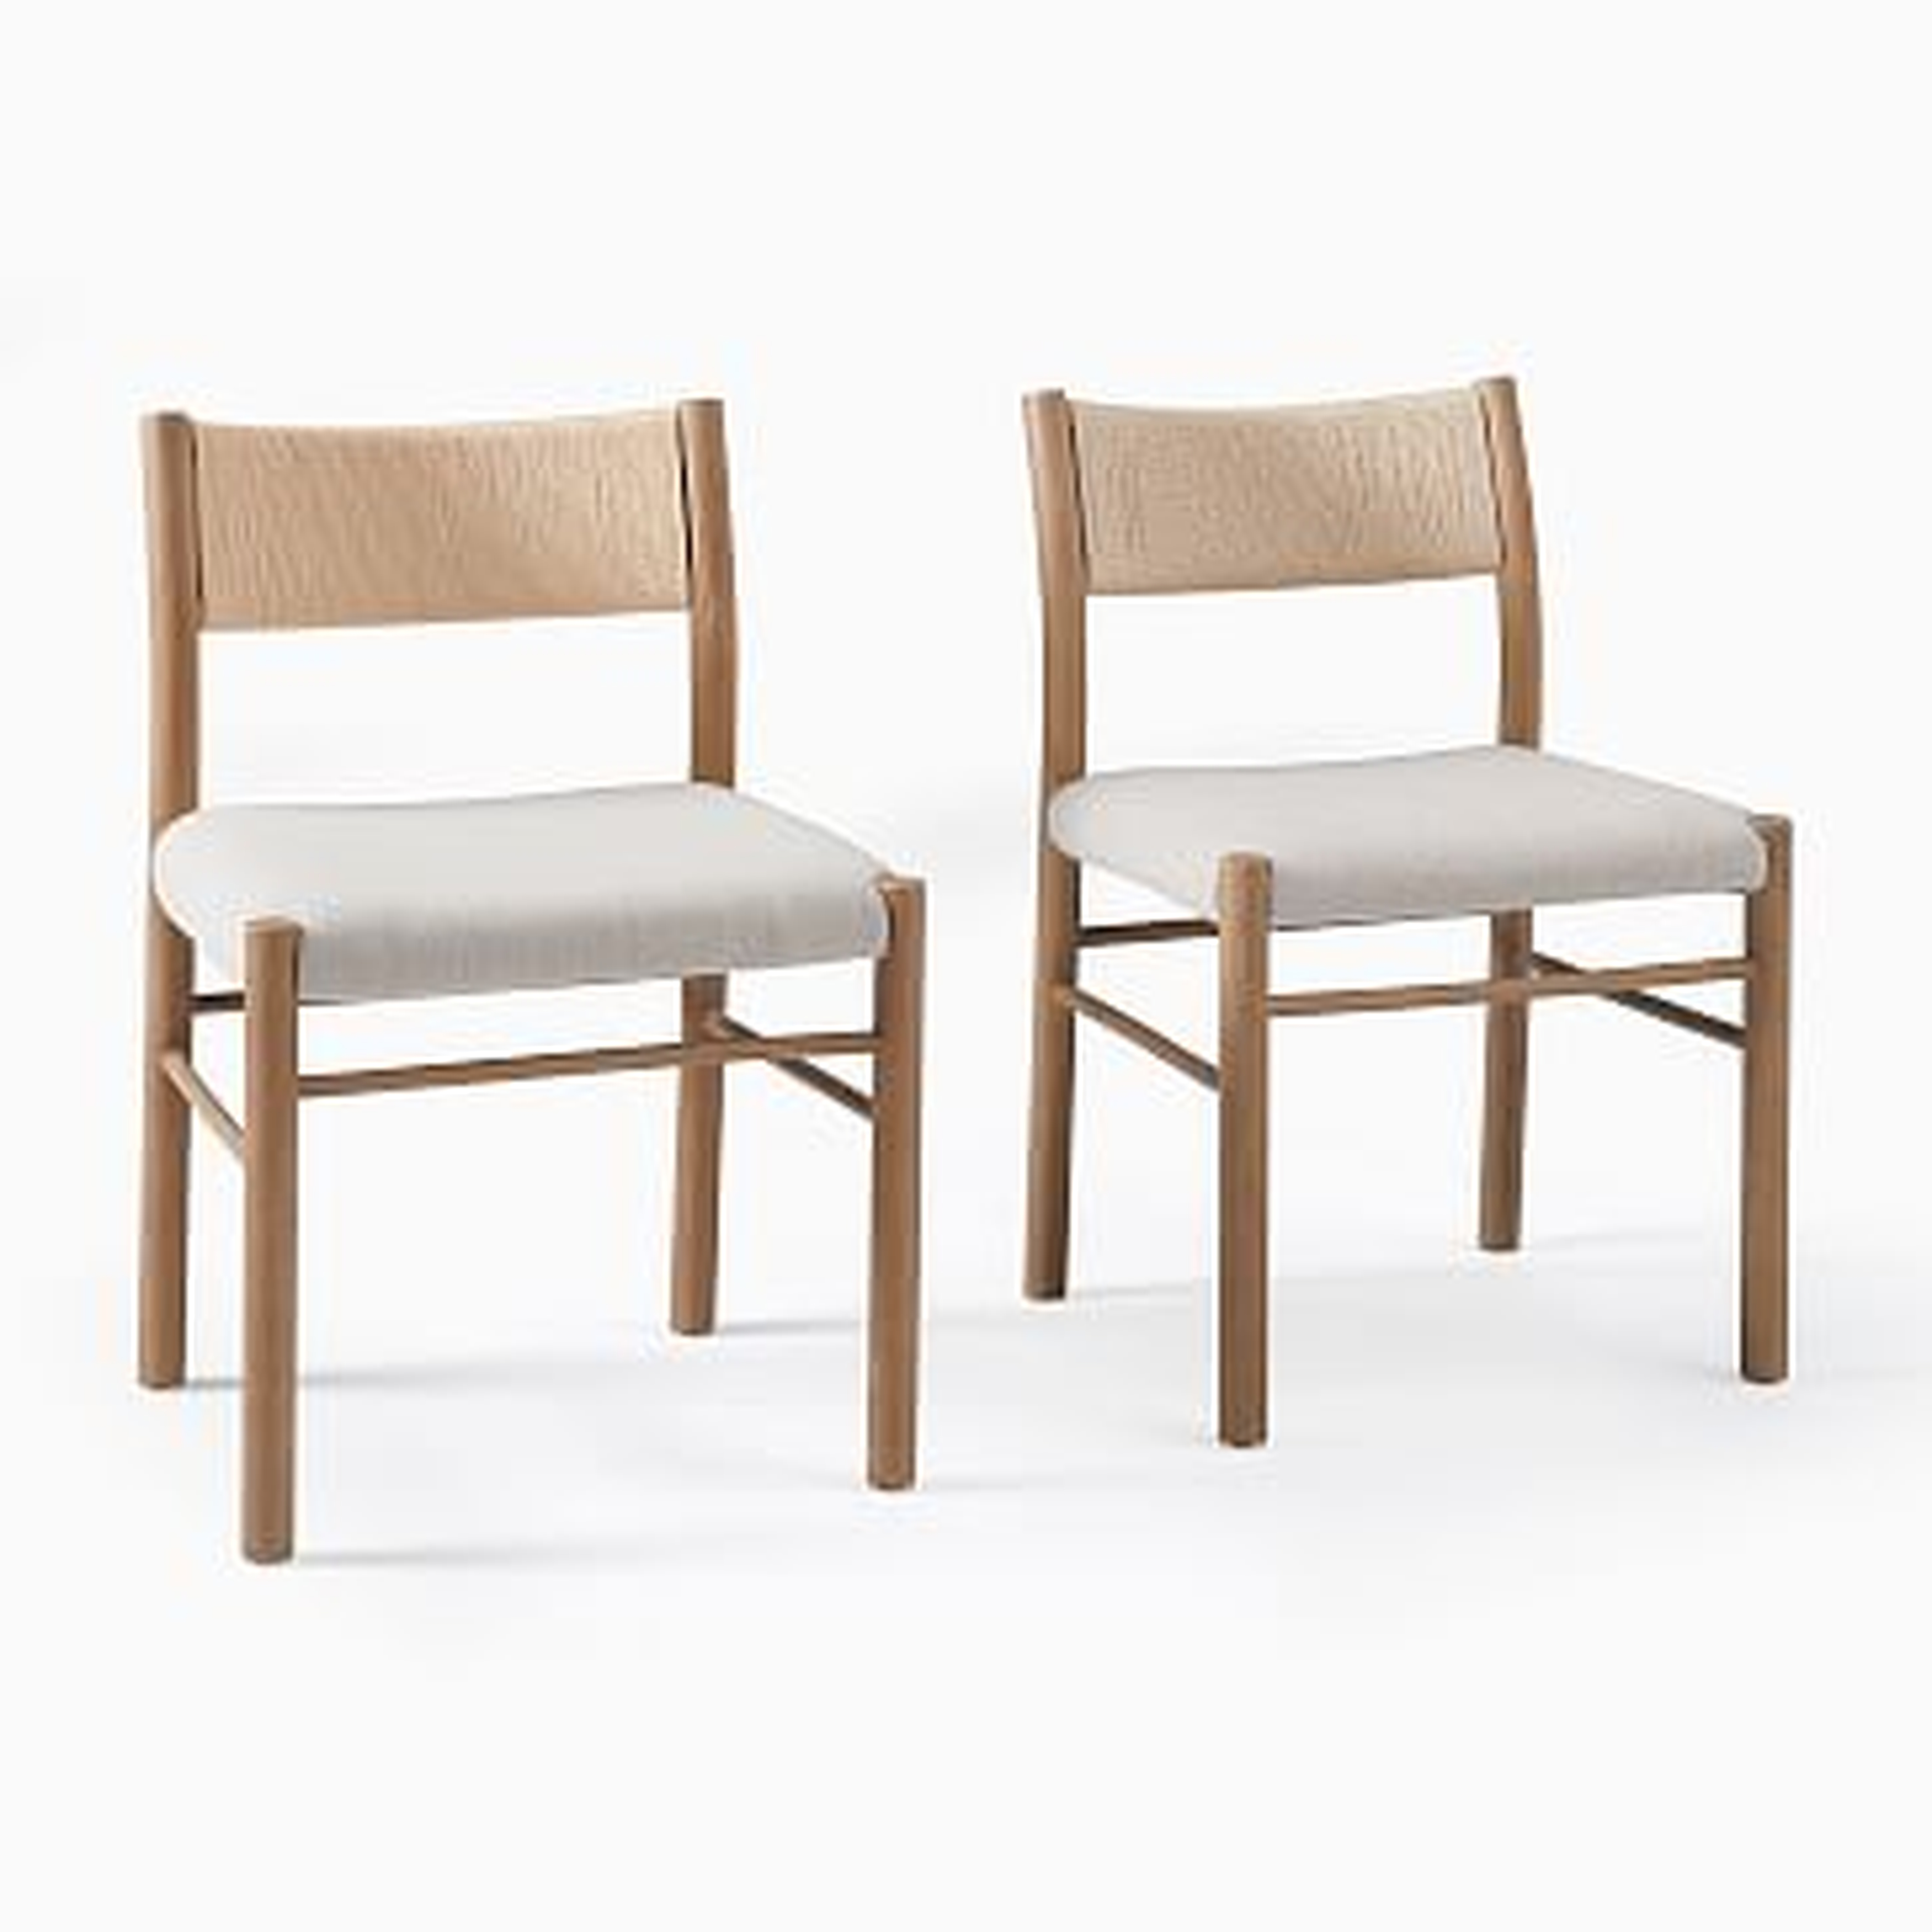 Pierre Woven Side Chair, Set of 2, Dune - West Elm